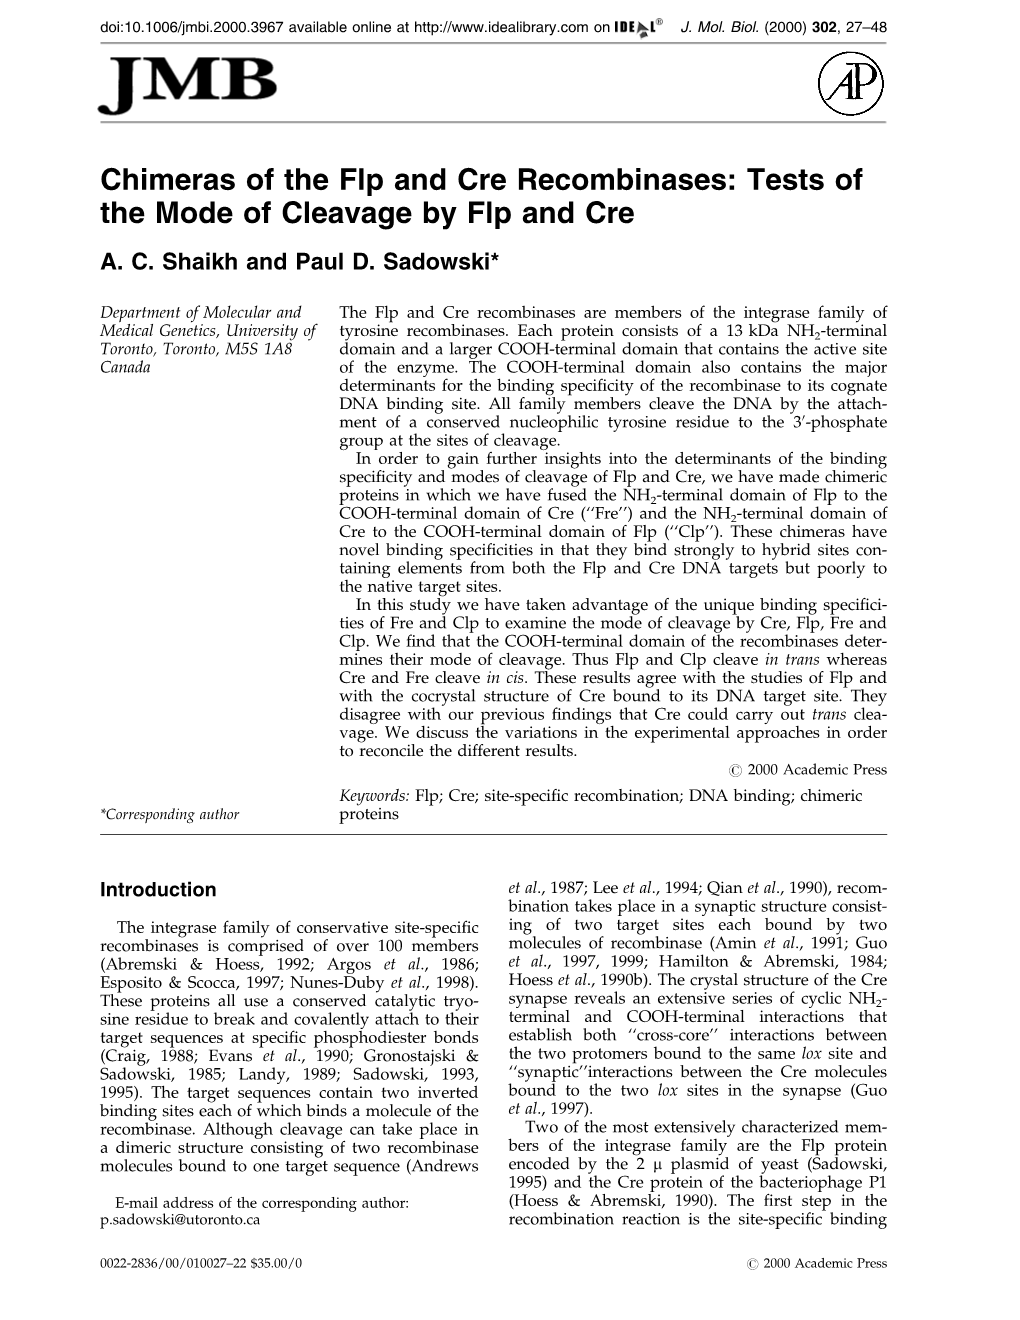 Chimeras of the Flp and Cre Recombinases: Tests of the Mode of Cleavage by Flp and Cre A